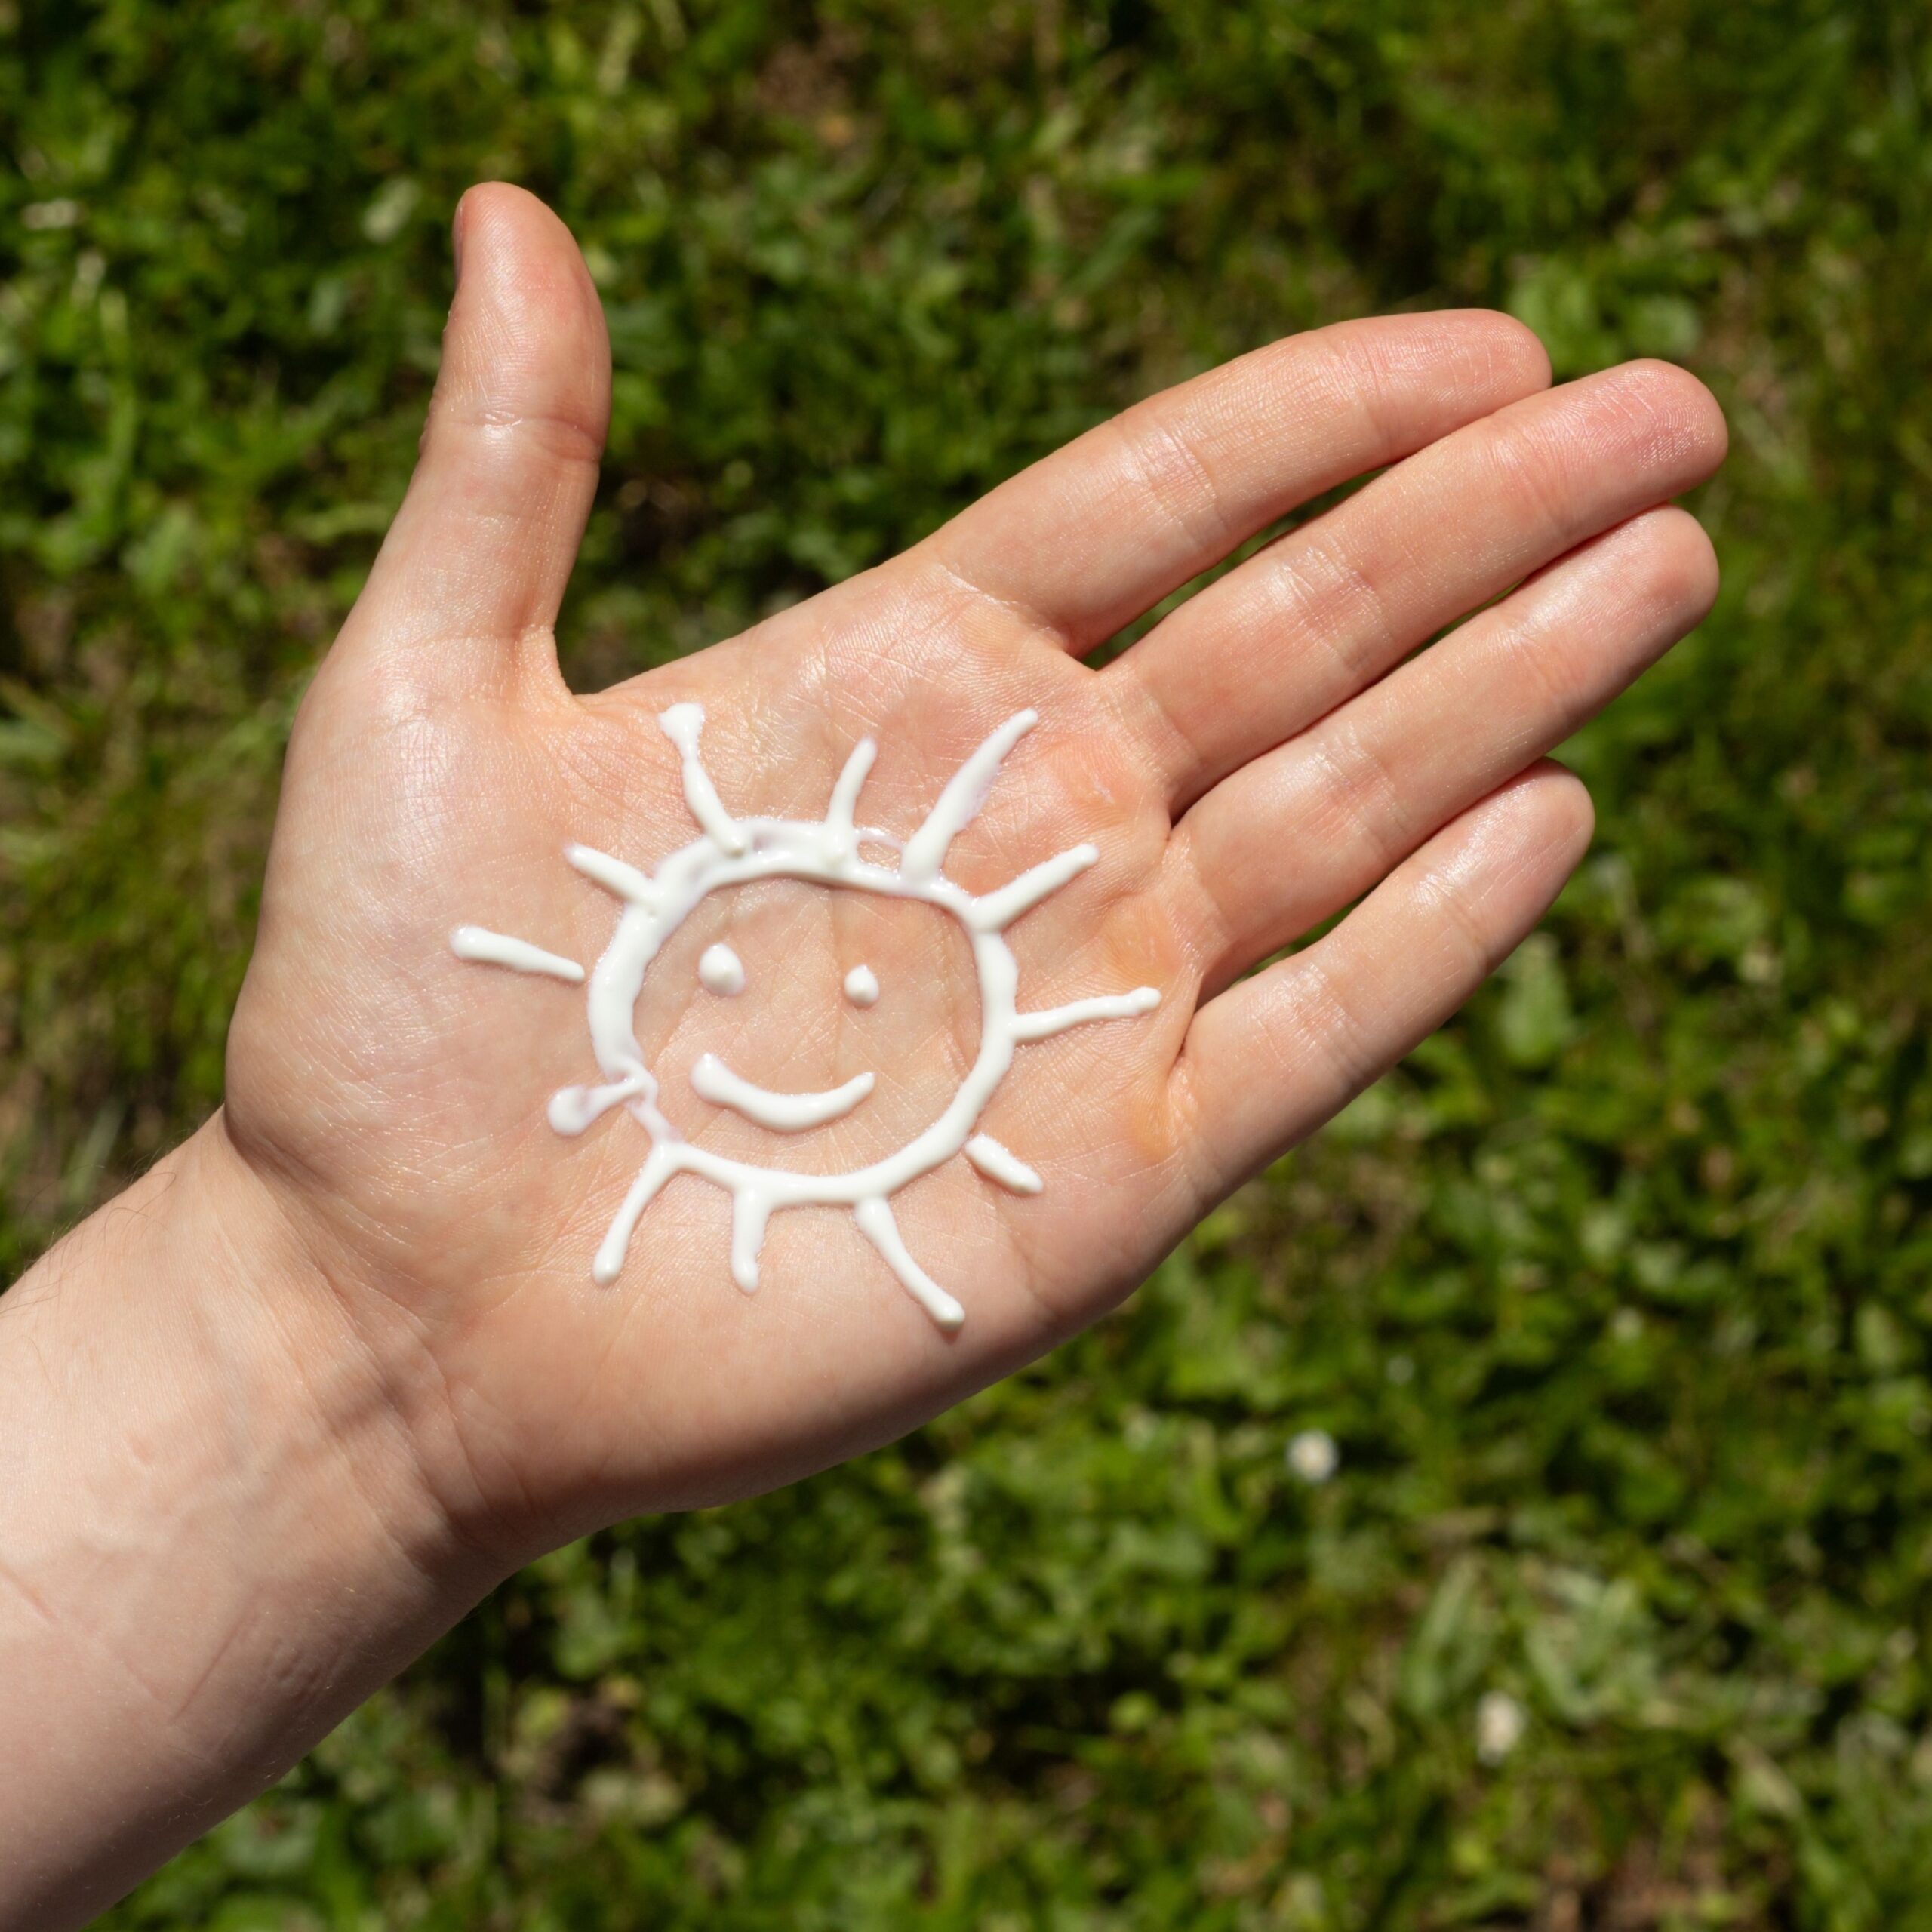 sun drawn in sunscreen on palm of hand